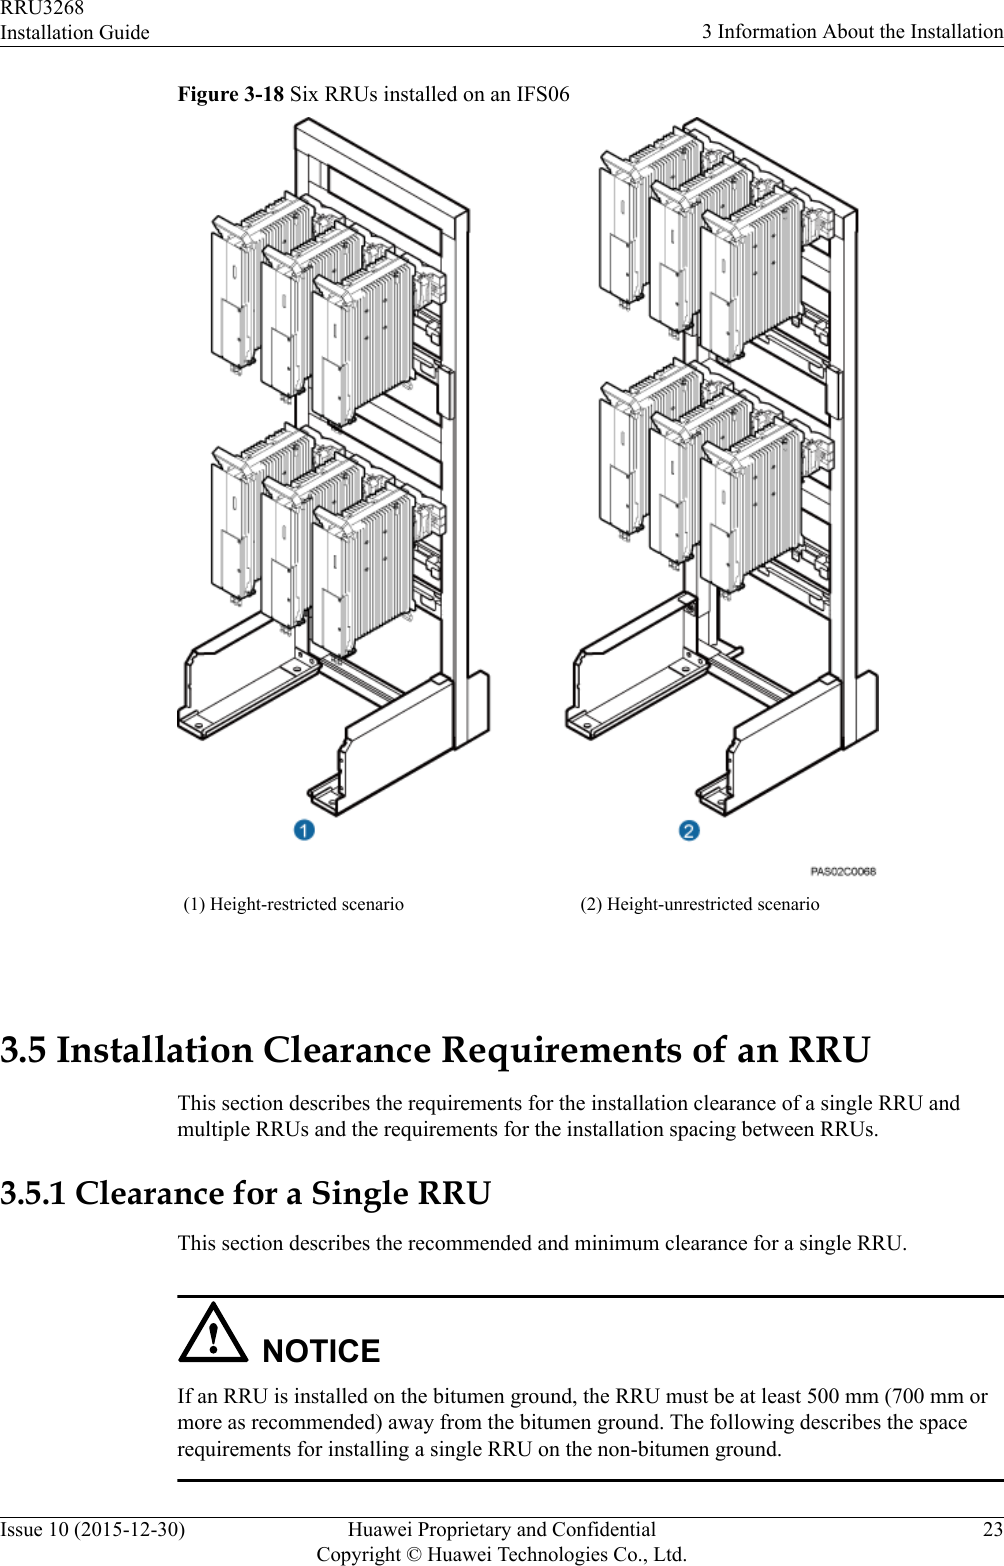 Figure 3-18 Six RRUs installed on an IFS06(1) Height-restricted scenario (2) Height-unrestricted scenario 3.5 Installation Clearance Requirements of an RRUThis section describes the requirements for the installation clearance of a single RRU andmultiple RRUs and the requirements for the installation spacing between RRUs.3.5.1 Clearance for a Single RRUThis section describes the recommended and minimum clearance for a single RRU.NOTICEIf an RRU is installed on the bitumen ground, the RRU must be at least 500 mm (700 mm ormore as recommended) away from the bitumen ground. The following describes the spacerequirements for installing a single RRU on the non-bitumen ground.RRU3268Installation Guide 3 Information About the InstallationIssue 10 (2015-12-30) Huawei Proprietary and ConfidentialCopyright © Huawei Technologies Co., Ltd.23